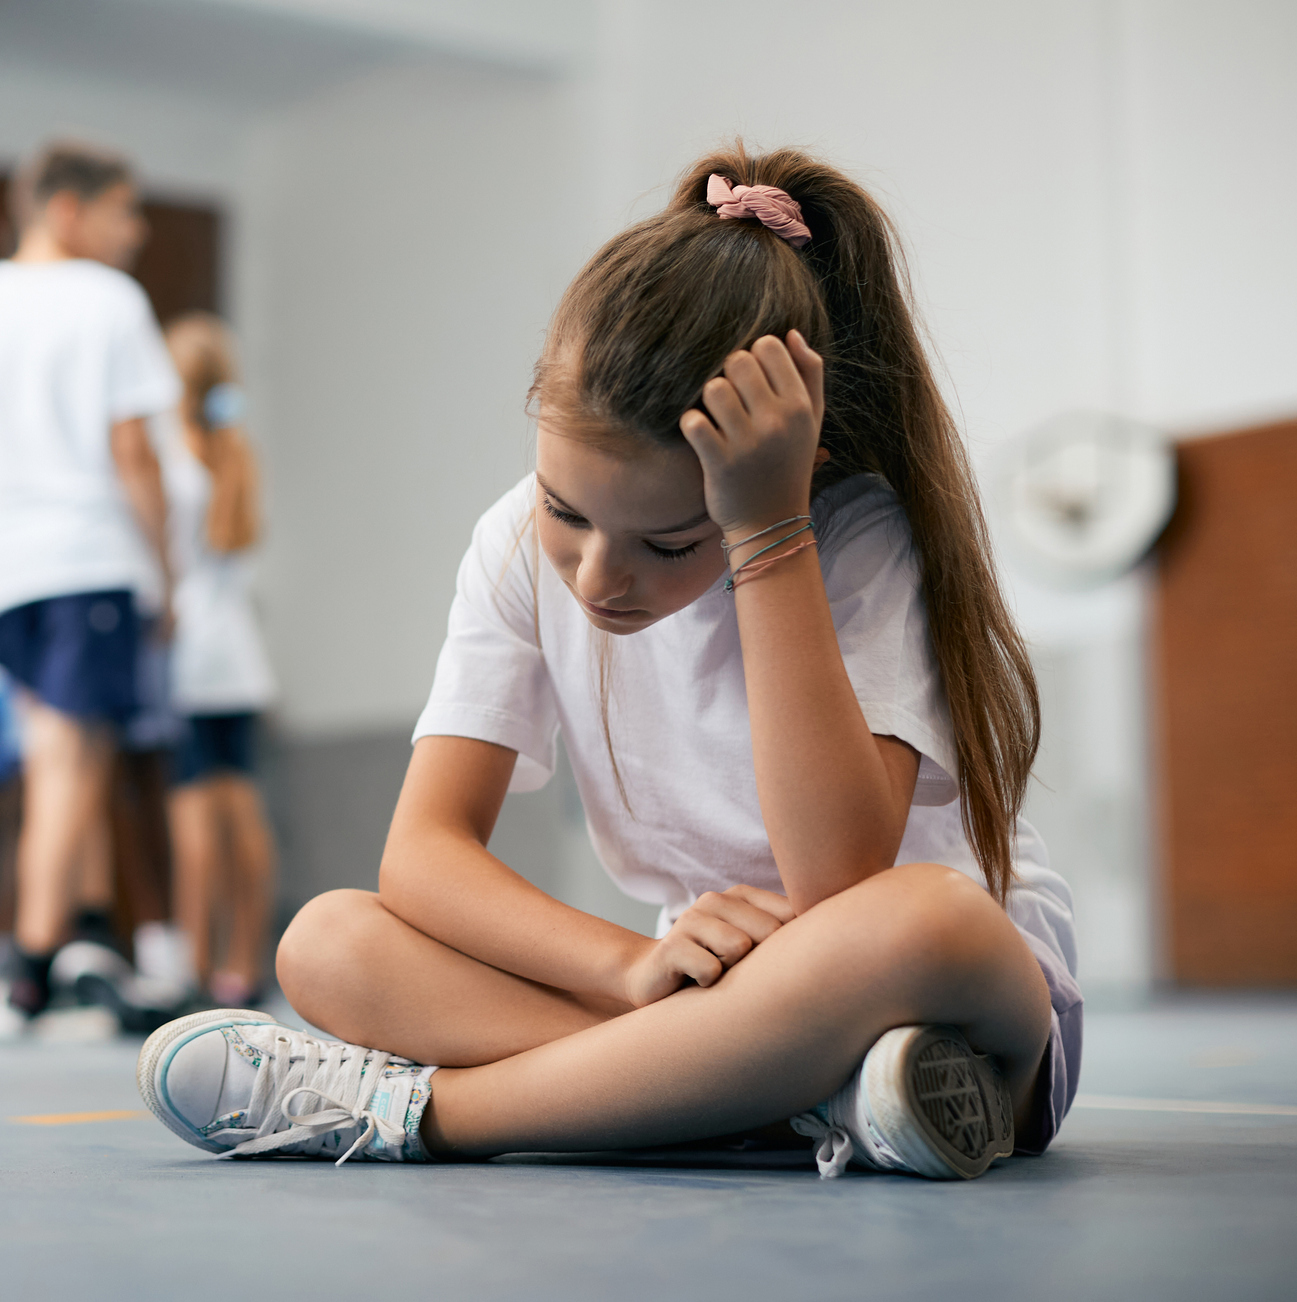 A photograph of a Sad schoolgirl feeling left out during physical activity class at school gym.